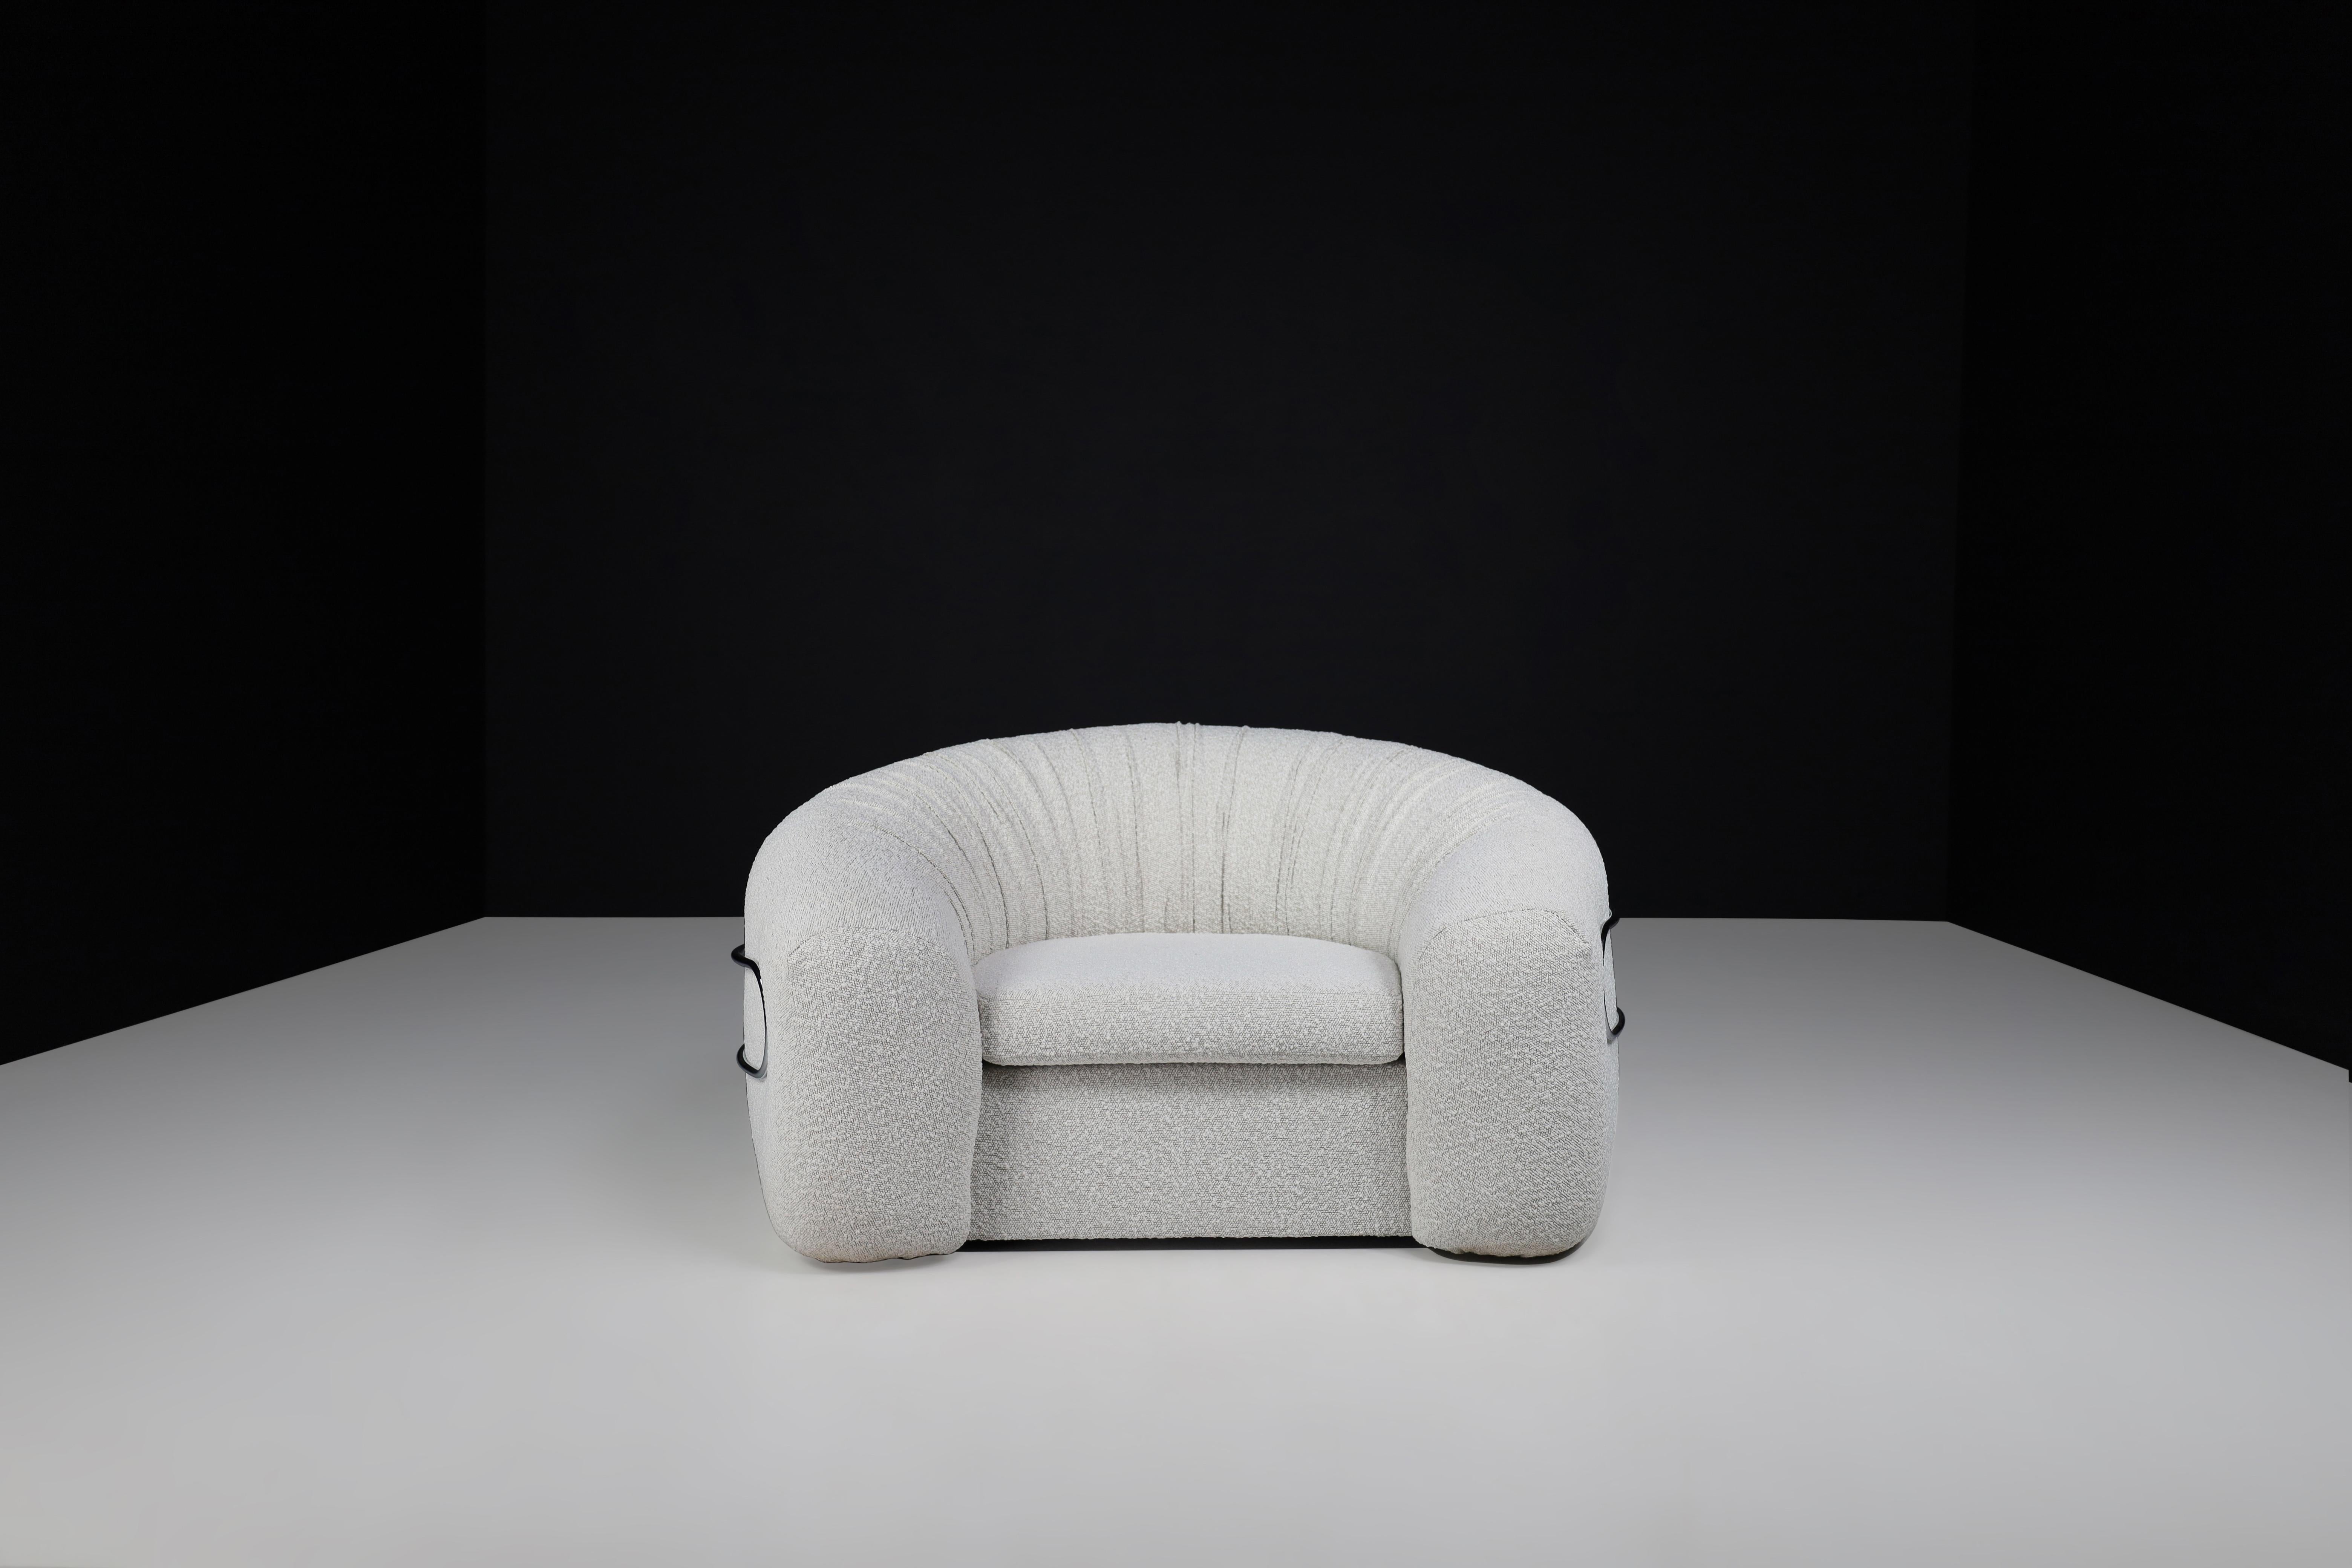 De Pas, D’Urbino and Lomazzi Lounge Chair  Italy 1970. 

This very cool-shaped lounge chair was designed by Jonathan de Pas, Donato D'urbino, and Paolo Lomazzo and made in  Italy in 1970. This chair has a new off-white bouclé fabric upholstery, and